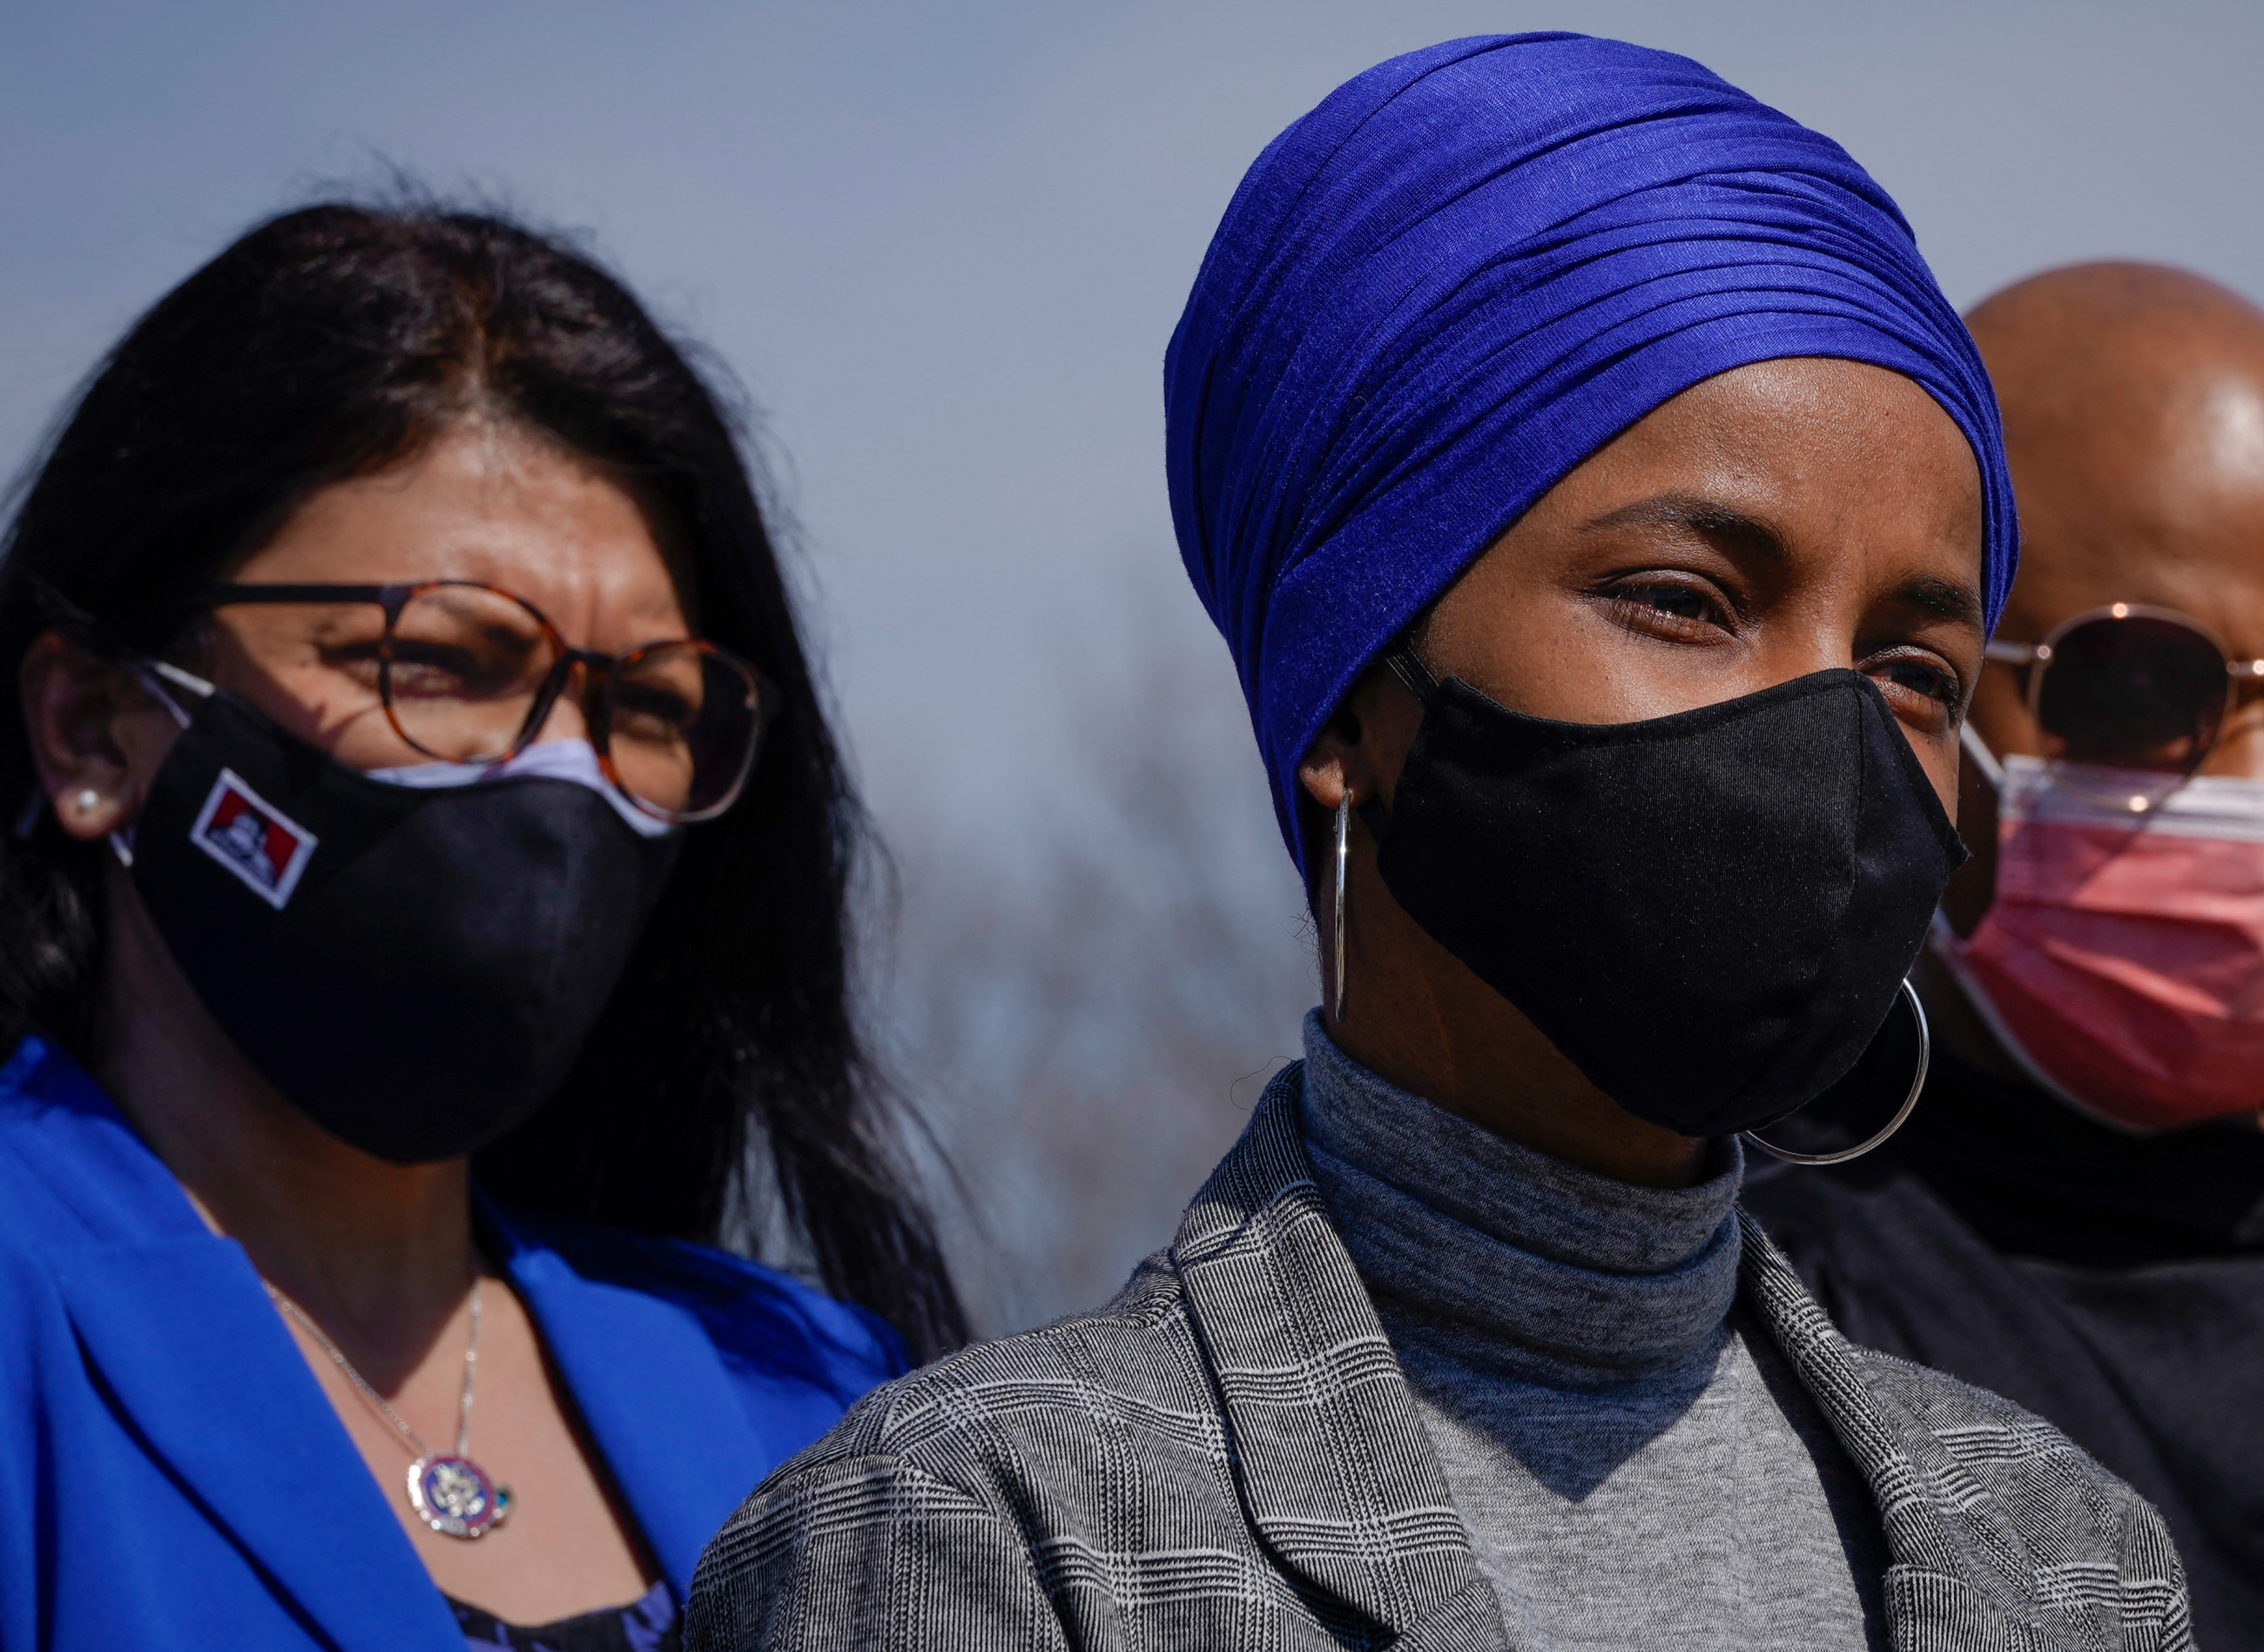 Congresswoman Ilhan Omar was also the subject of a contentious AIPAC ad campaign in May, where her face was placed beside Hamas rockets.